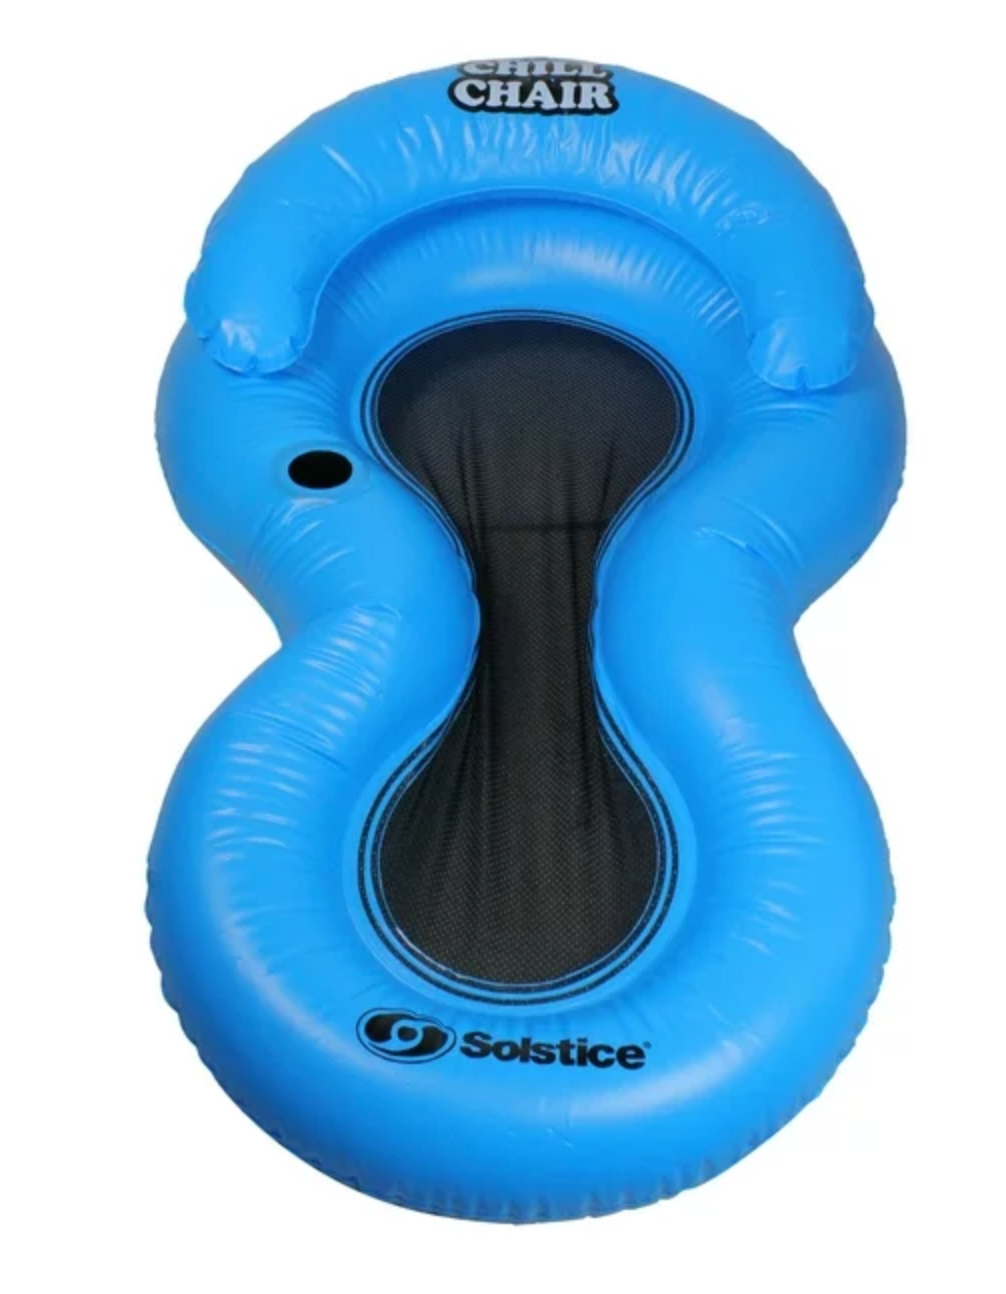 Solstice Chill Chair